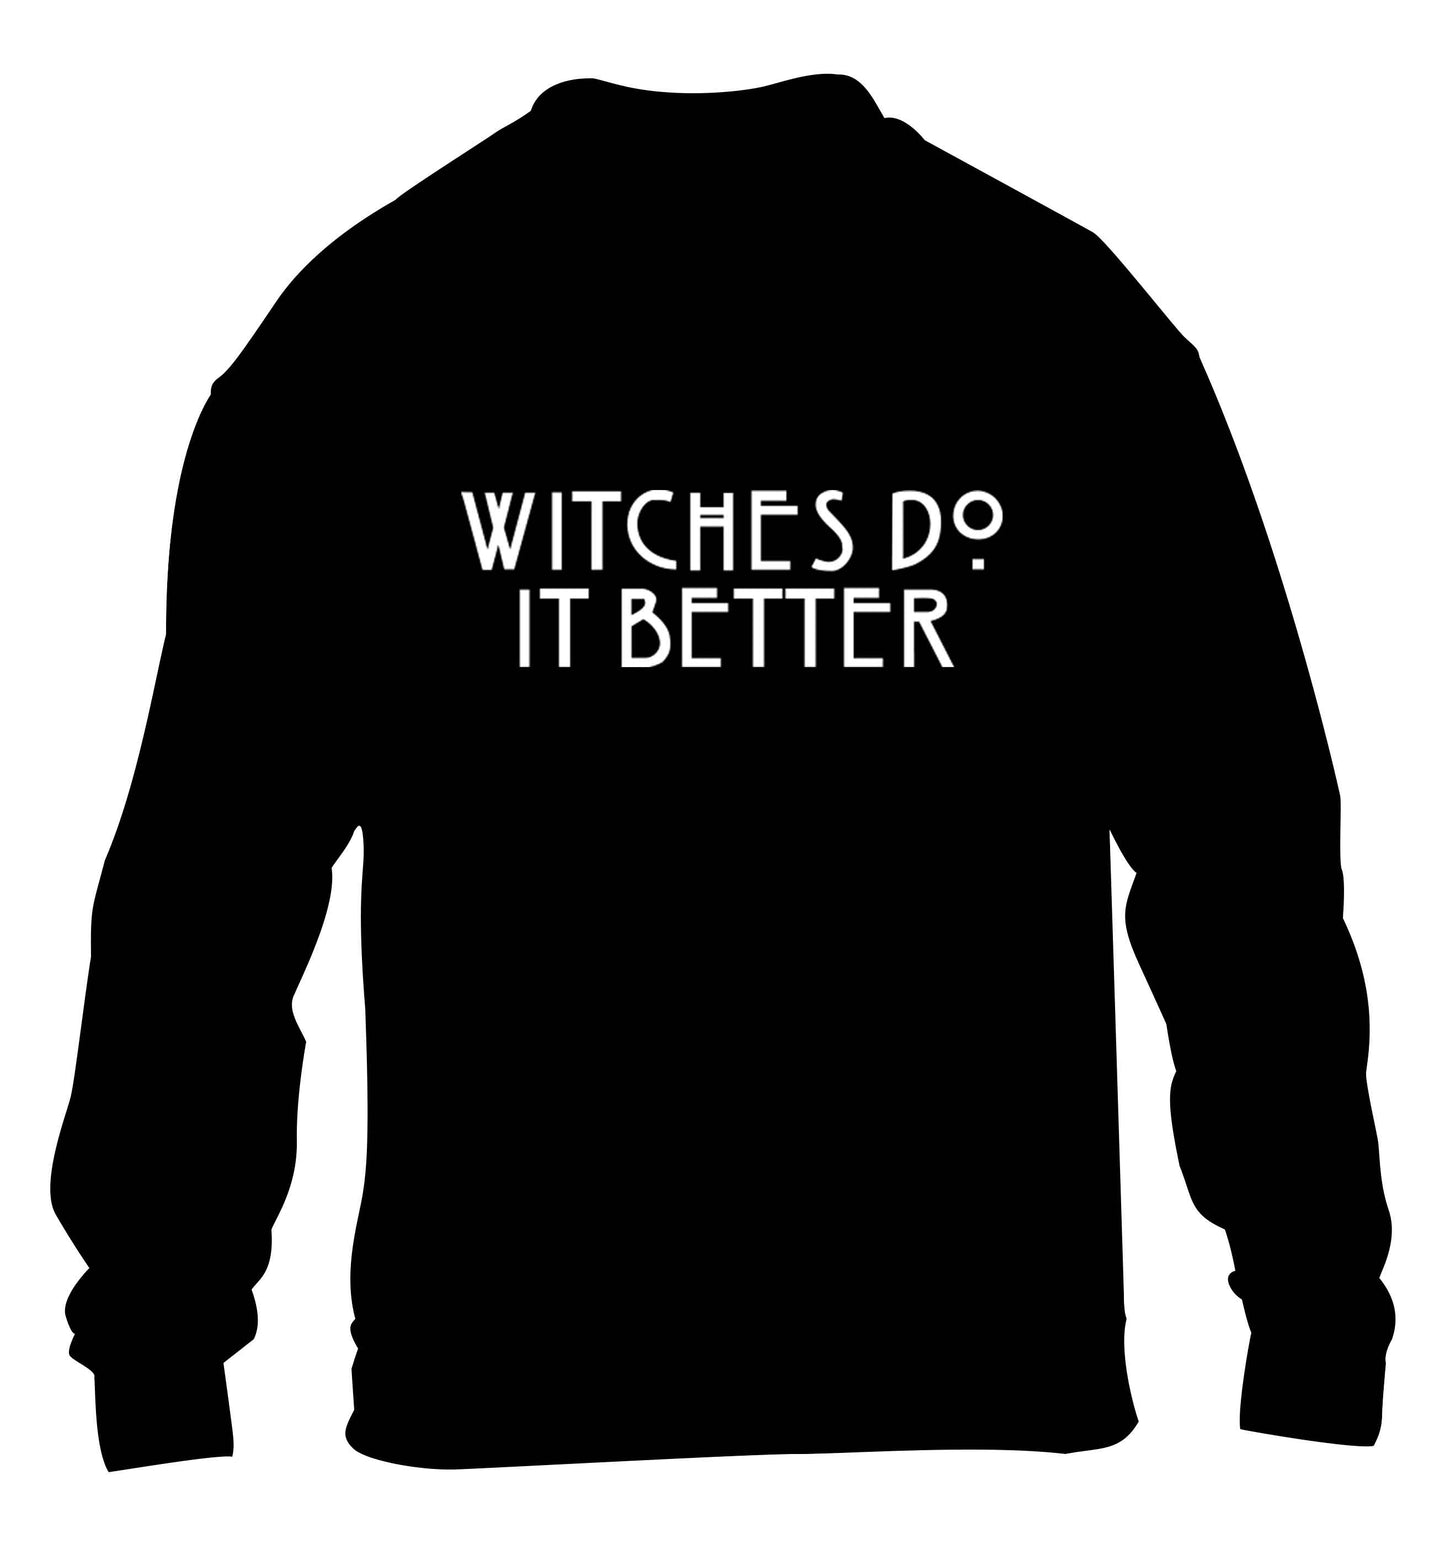 Witches do it better children's black sweater 12-13 Years